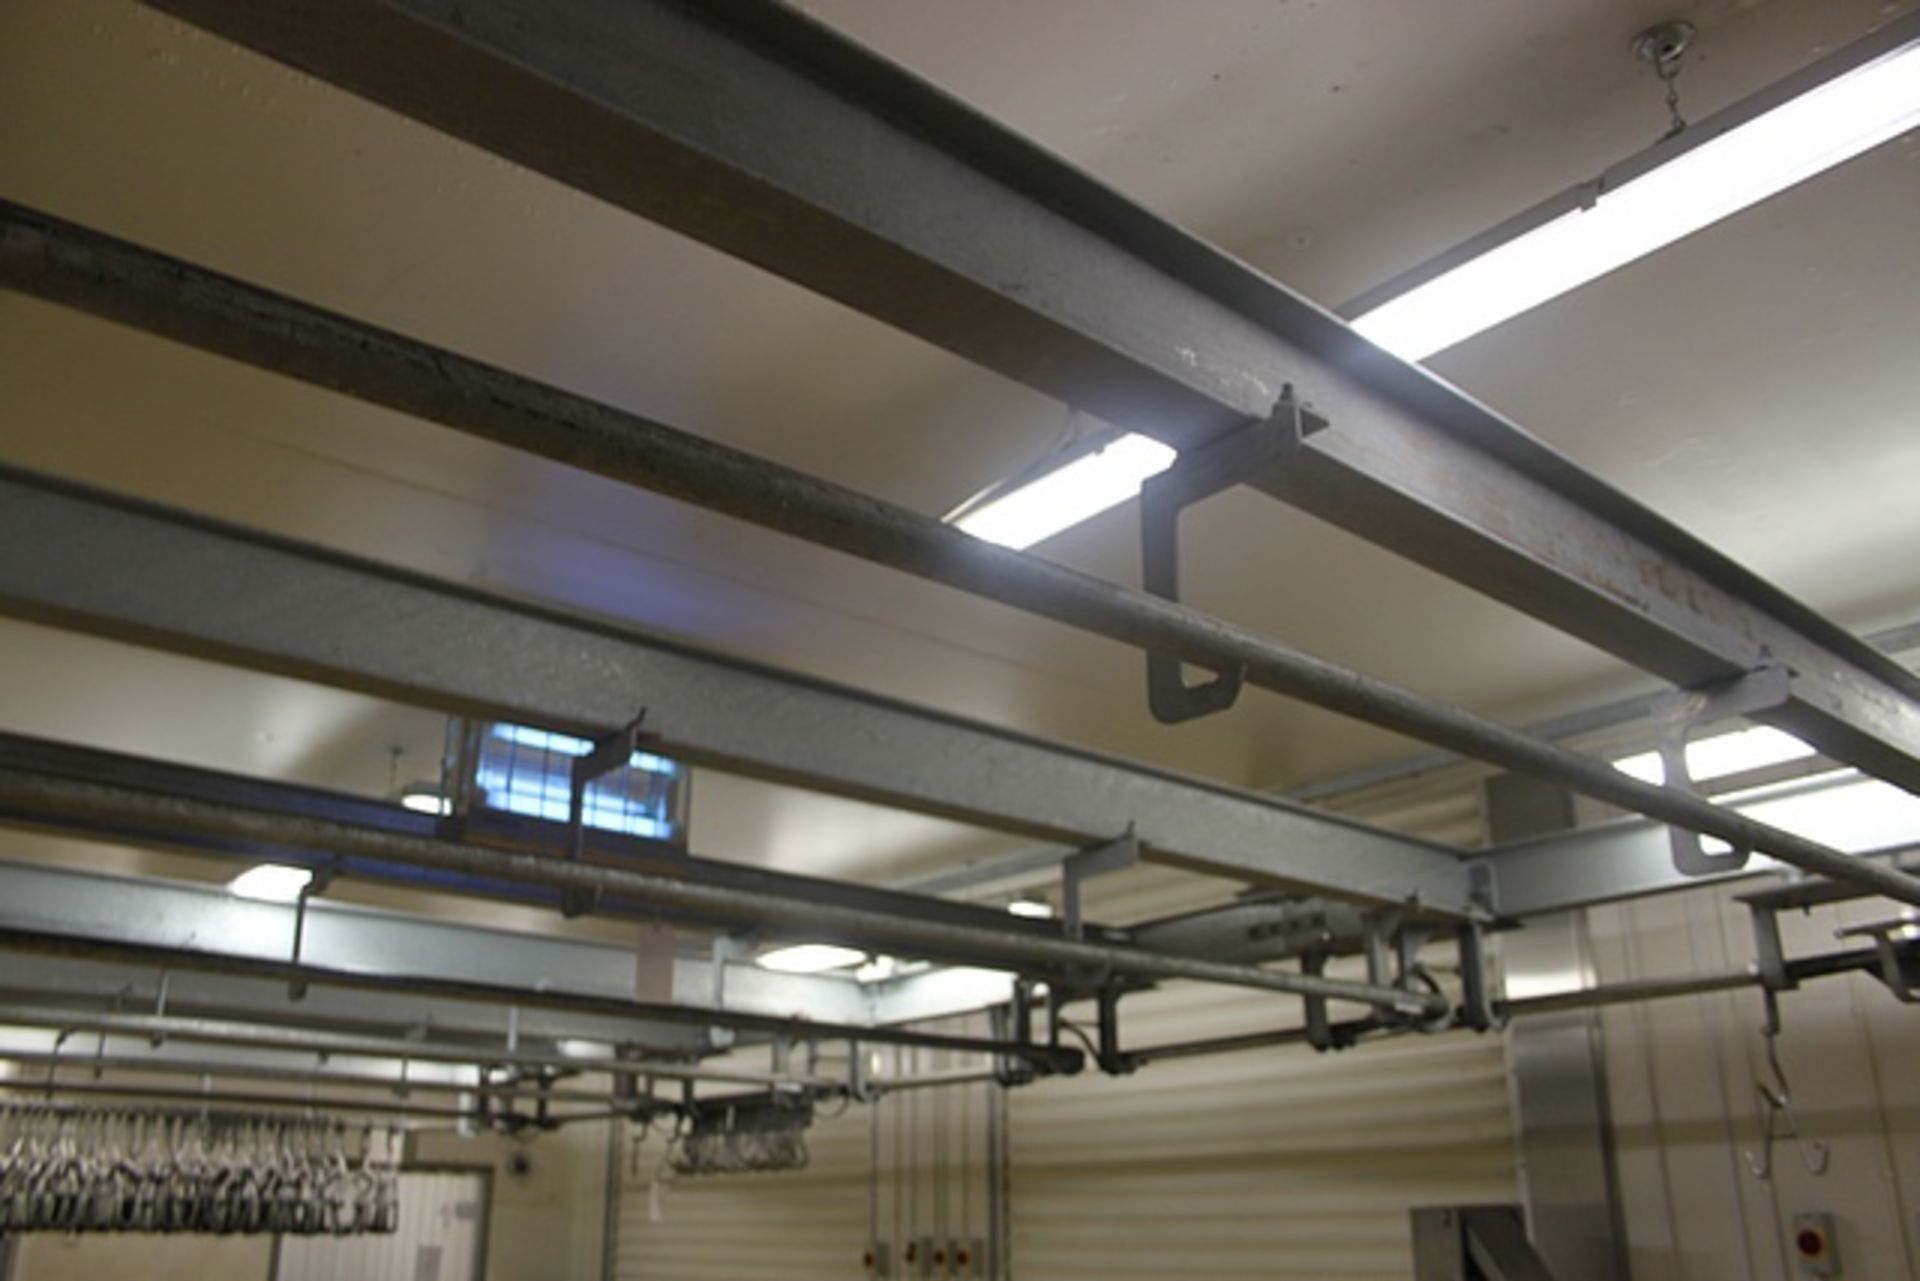 Chill Rails Meat & Slaughterhouse galvanised round bar hanging rail system manual operated - Image 2 of 2